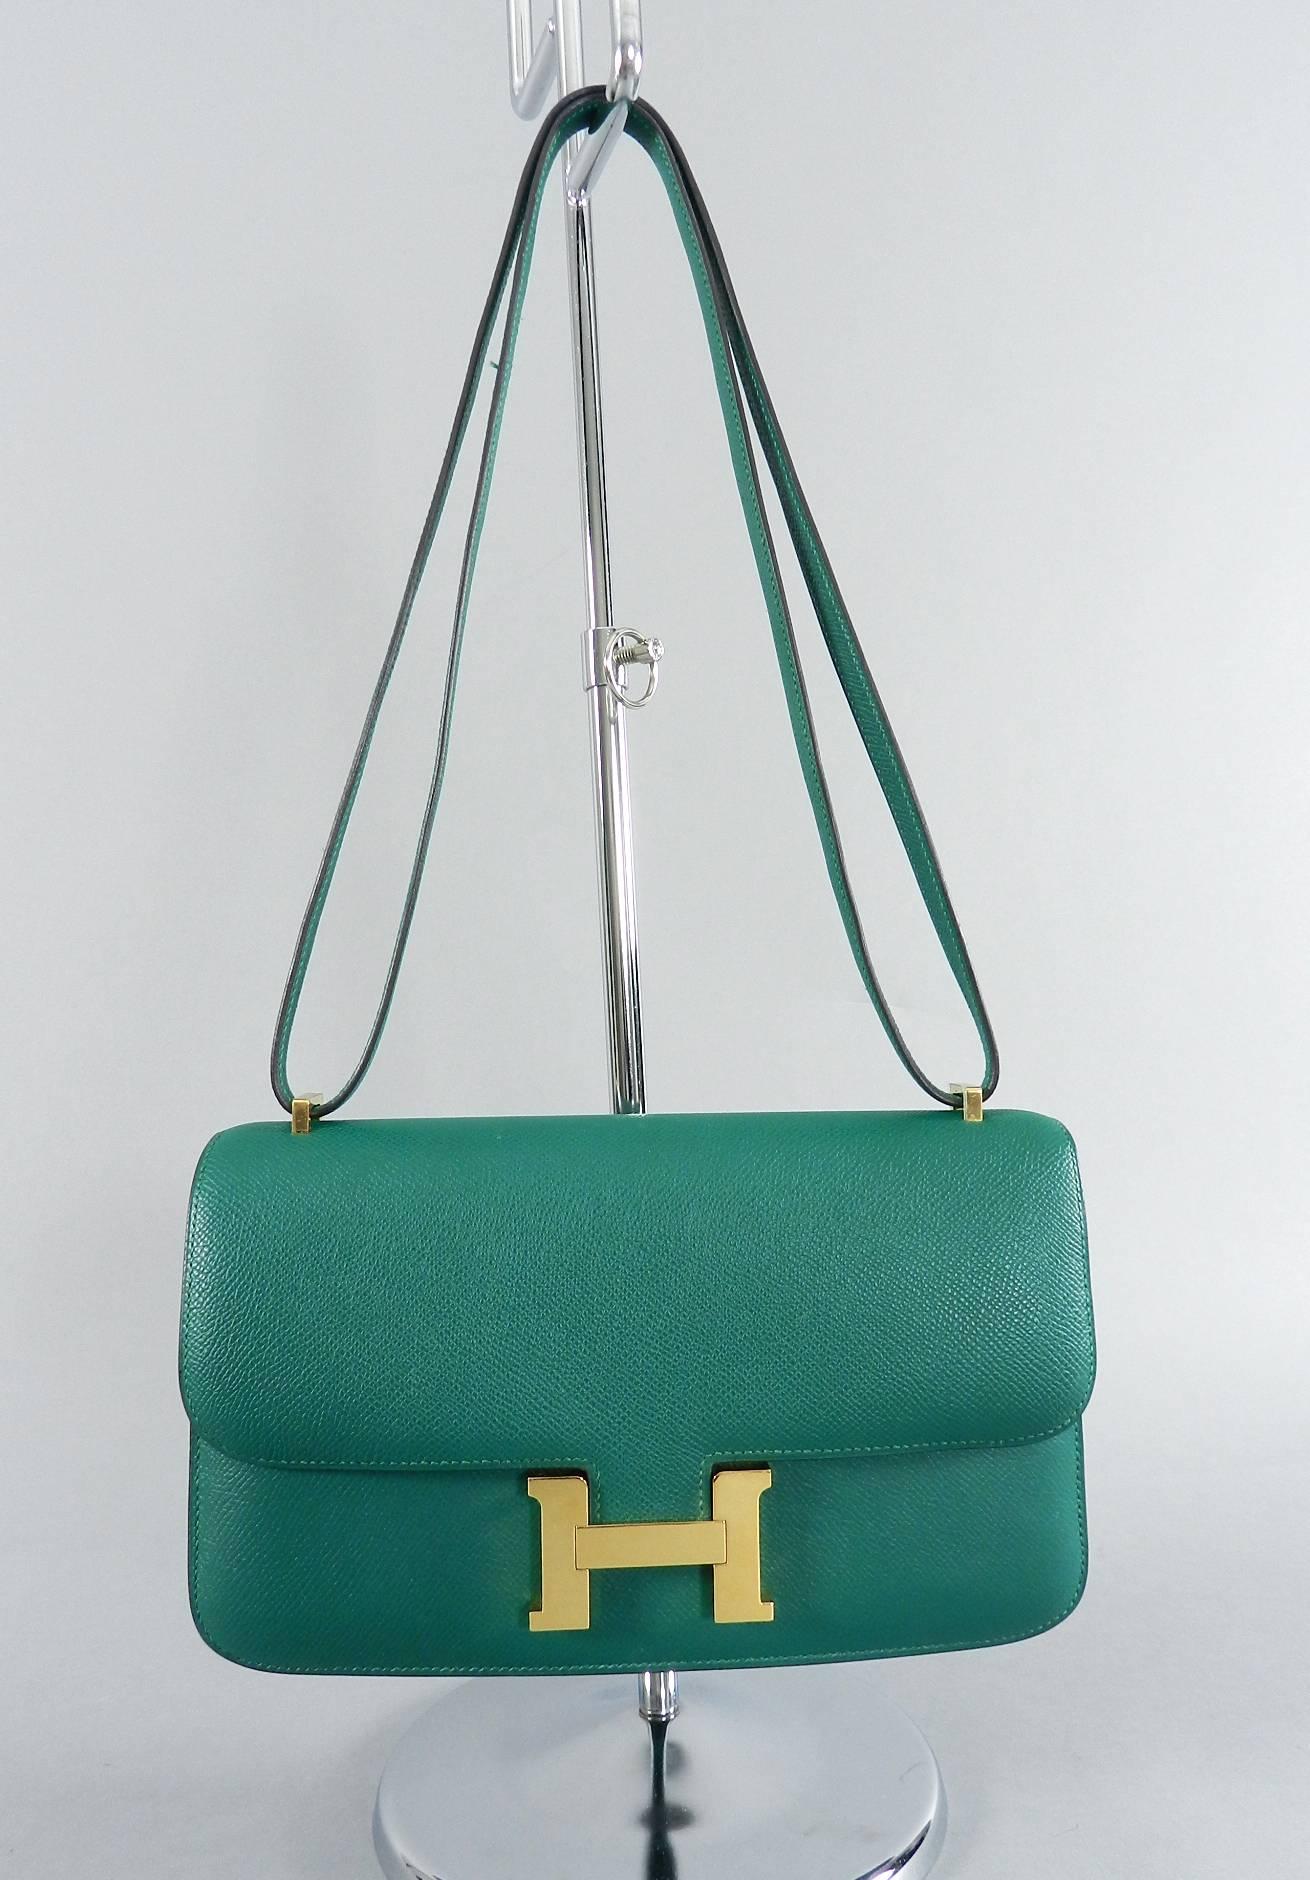 Hermes constance elan bag.  Malachite green color with goldtone metal hardware in Epsom leather.  Date stamp R in square for production year 2014. 
 Body of bag measures 25 x 15 x 6 cm and strap has a 12" drop when doubled and 21.5" drop